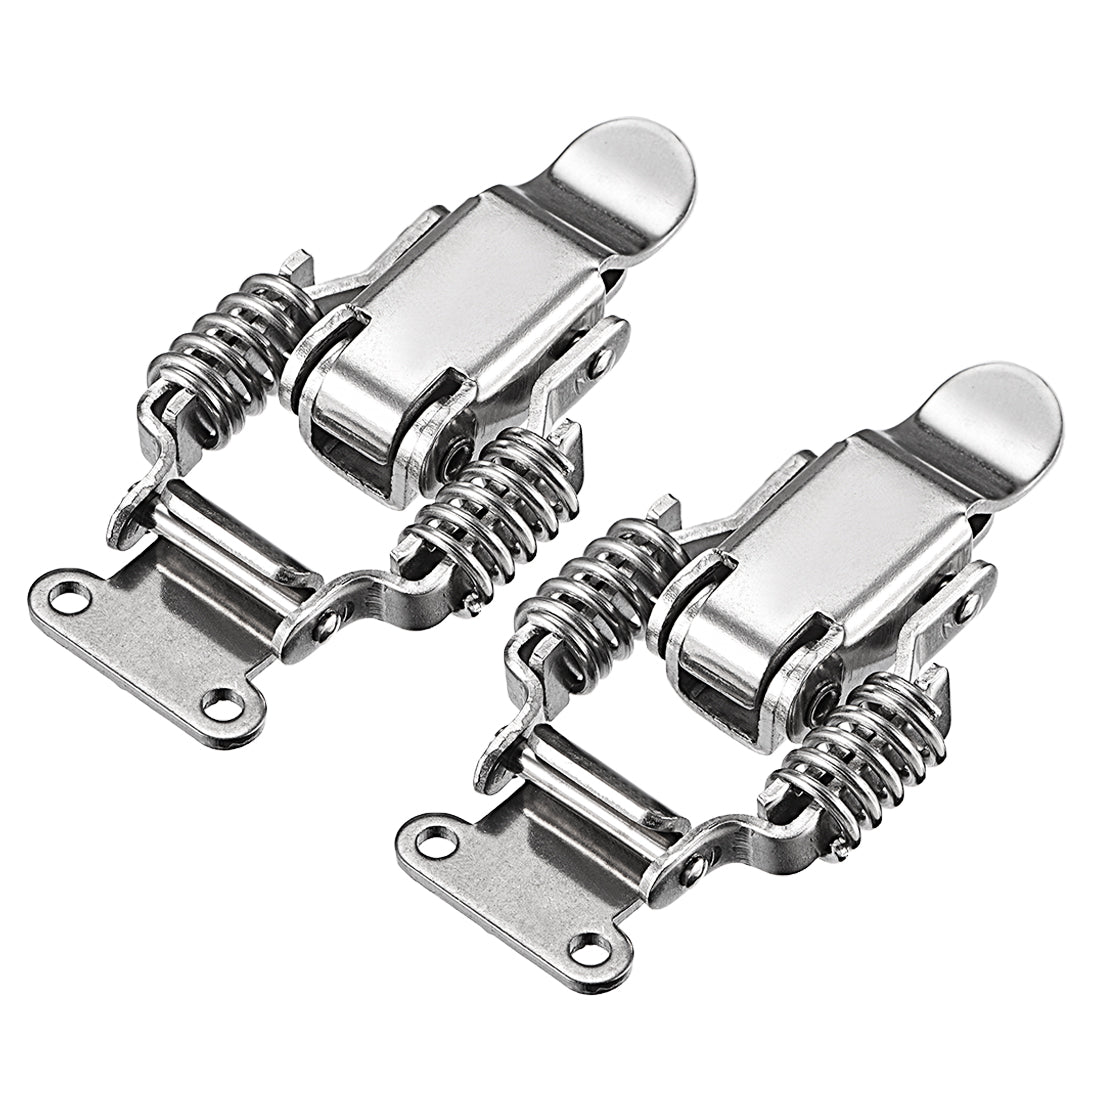 uxcell Uxcell 2pcs 201 Stainless Steel Spring Loaded Toggle Latch Catch Clamp 68mm